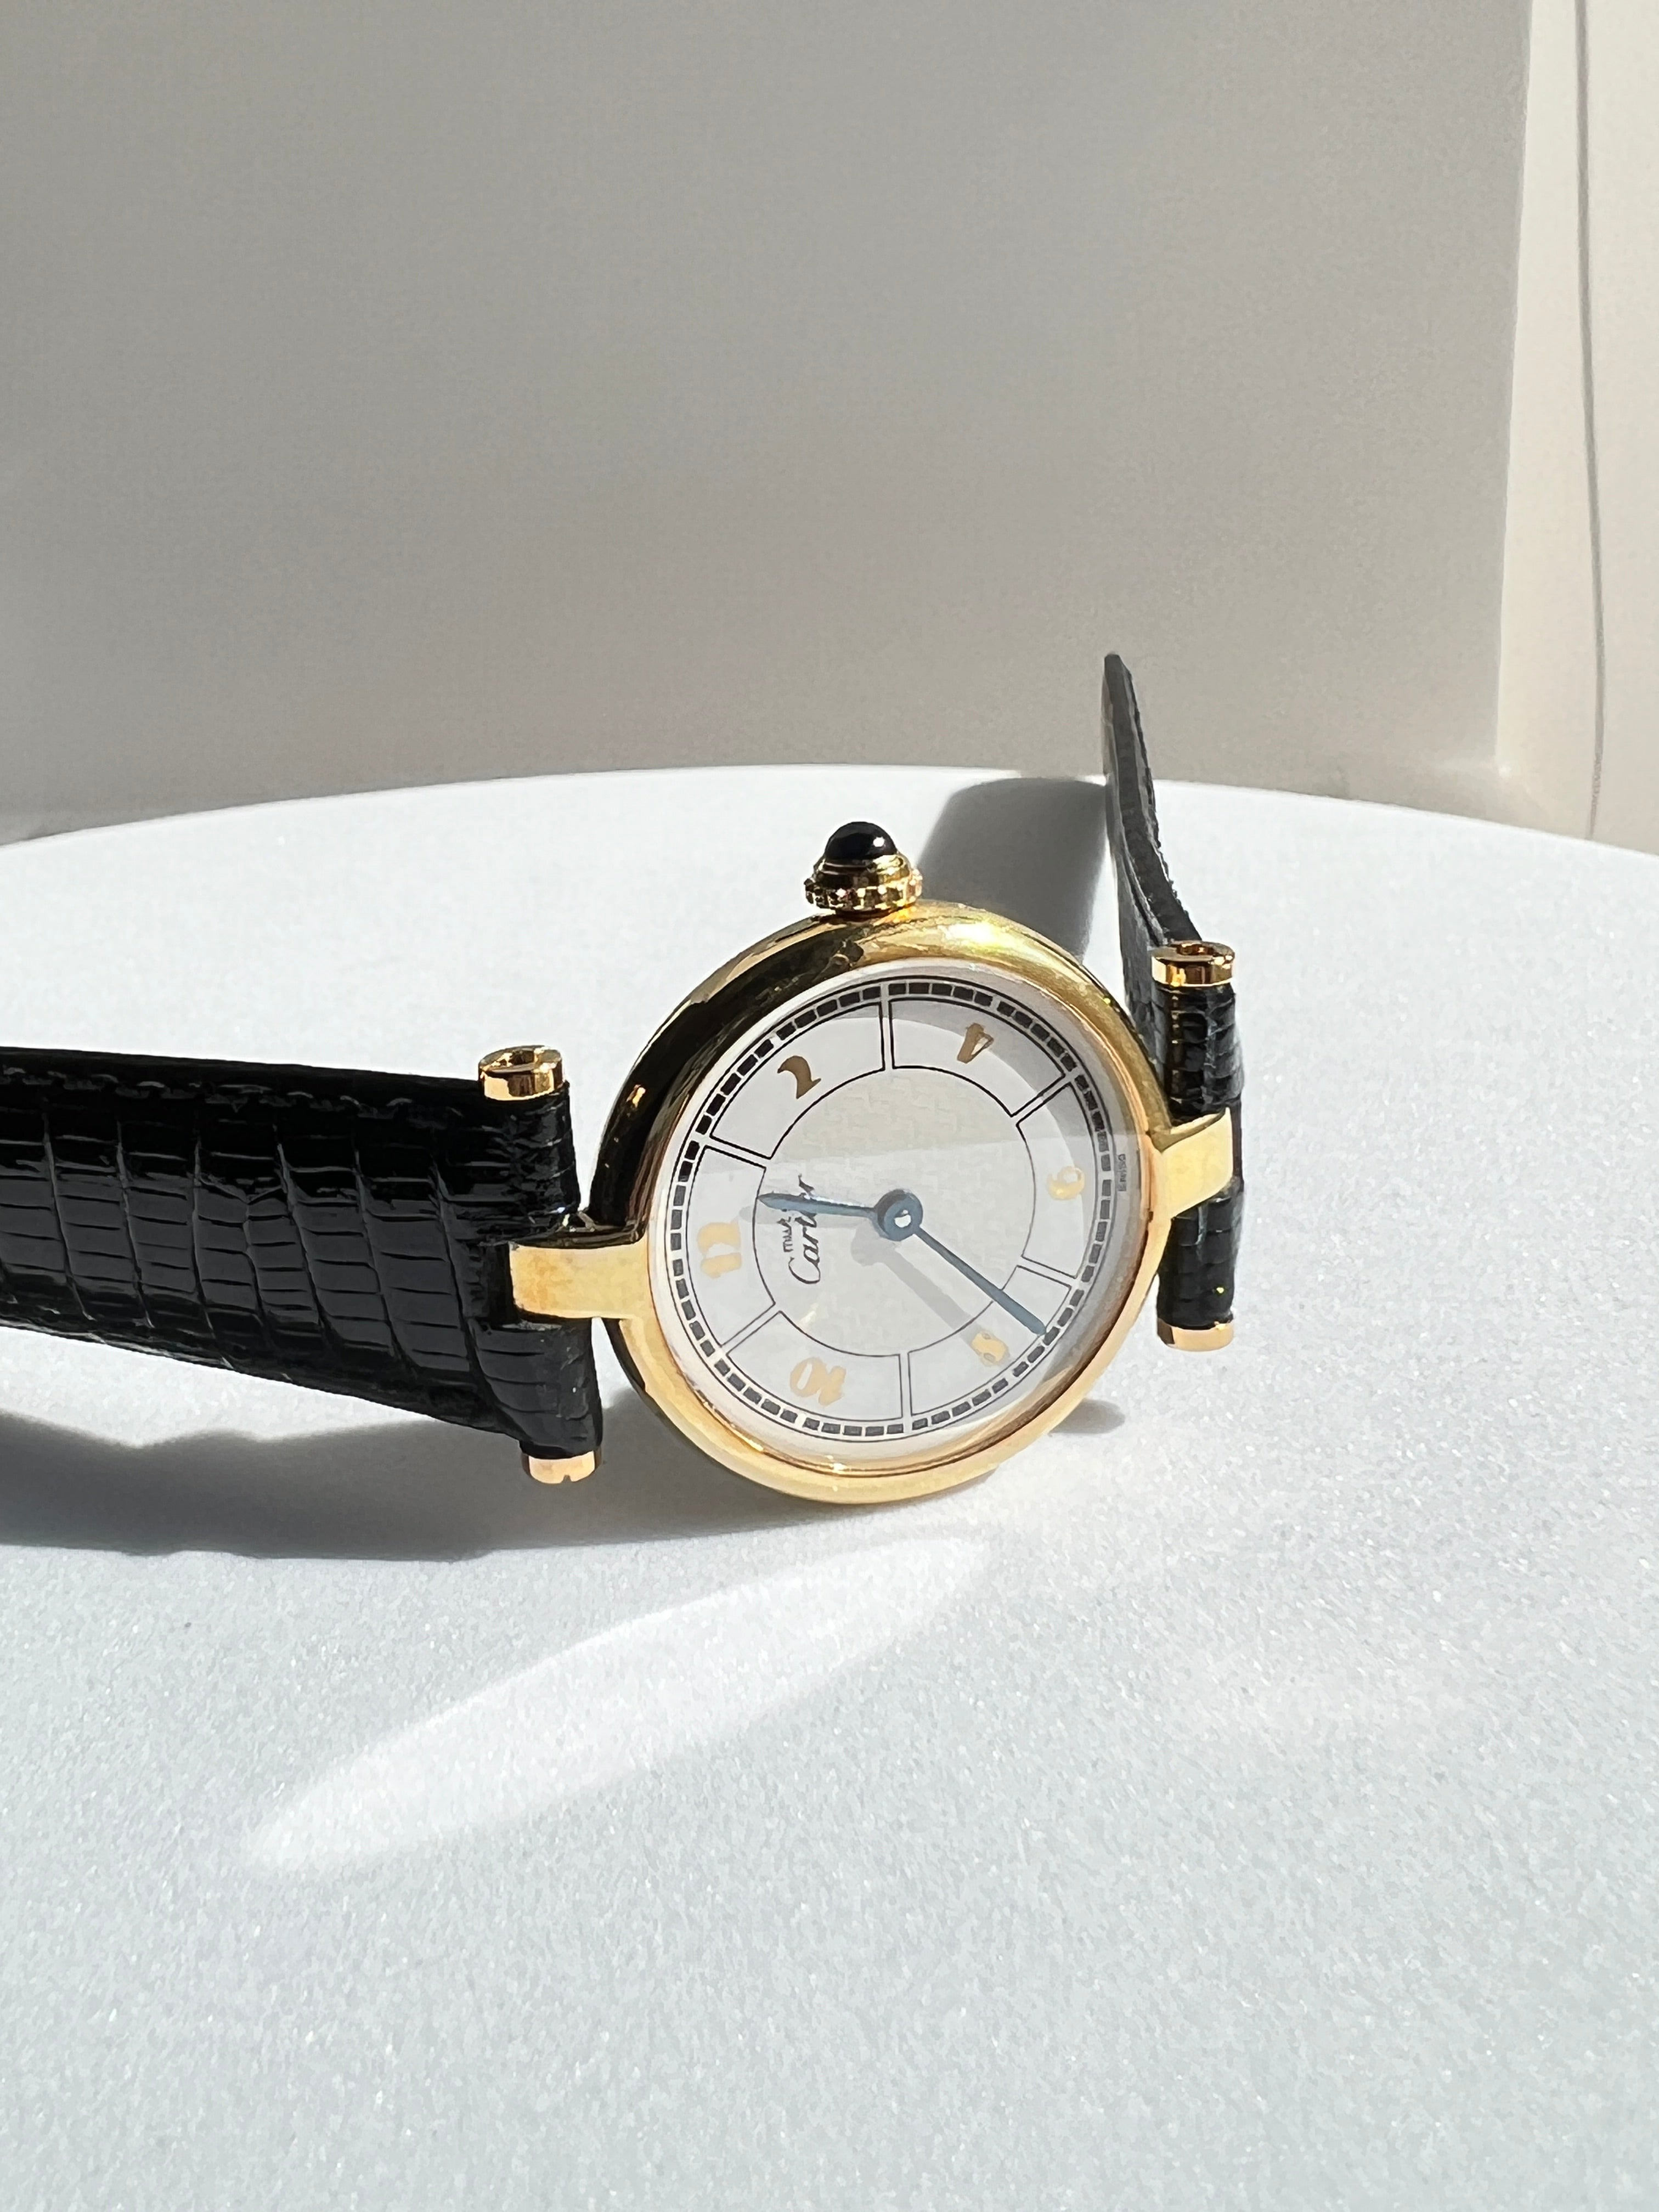 Cartier watch Vendome with Arabic numerals, small and medium size, sterling silver with vermeil